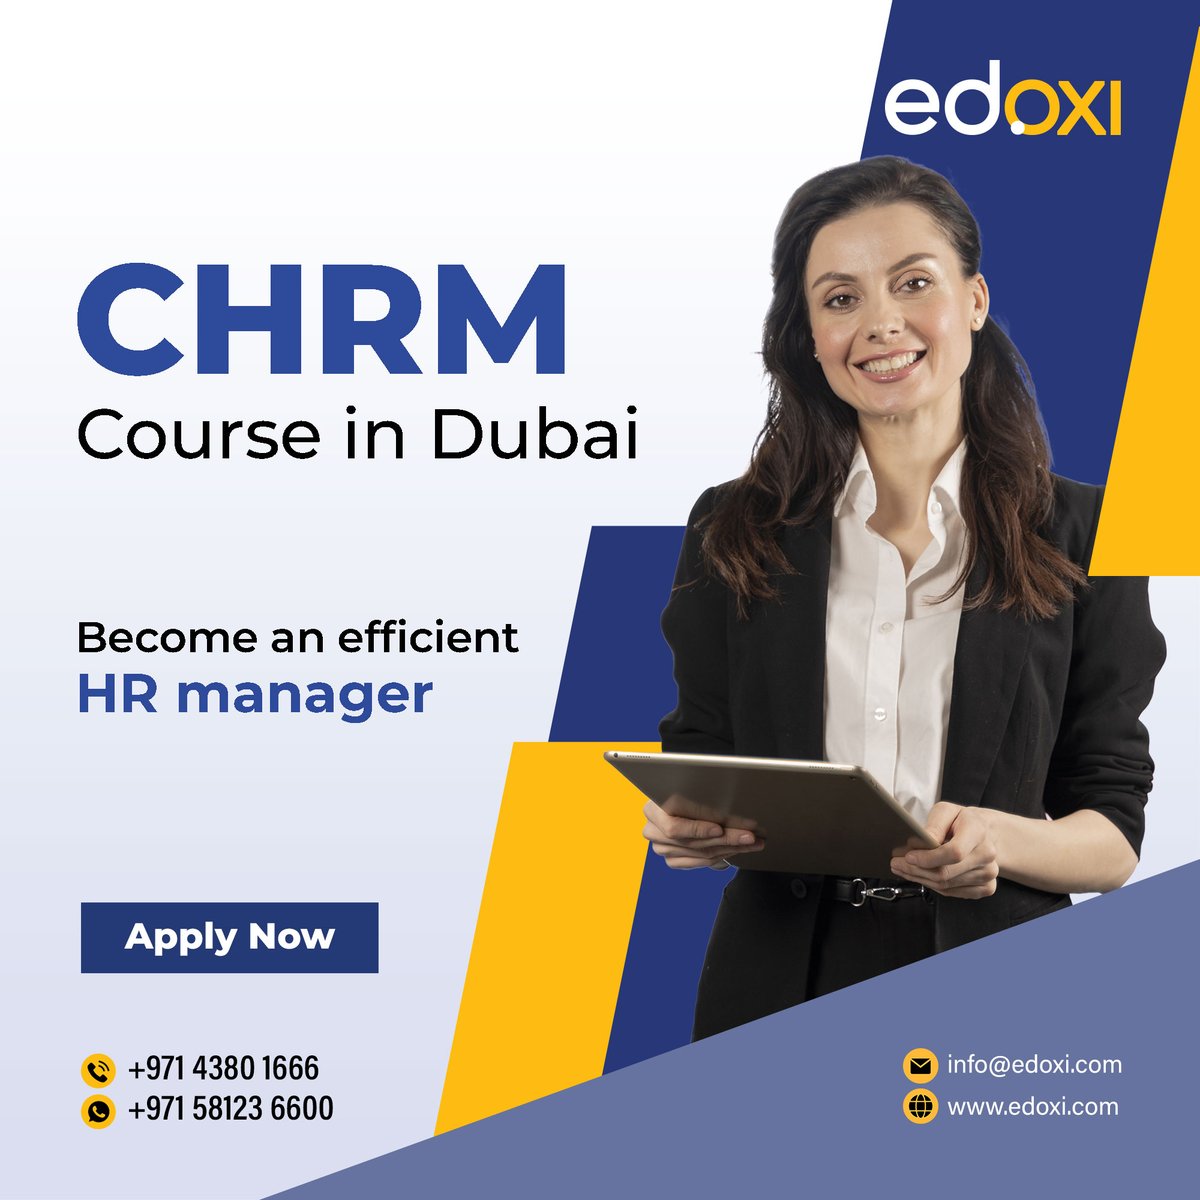 Edoxi's CHRM Course in Dubai offers 24 hours of expert mentorship, equipping you with HR management skills and test-taking strategies for CHRM certification.

Call us: +971 4380 1666

Mail us, at  info@edoxi.com

Learn more: rb.gy/xifq7i

#CHRM #HR #HRCareers